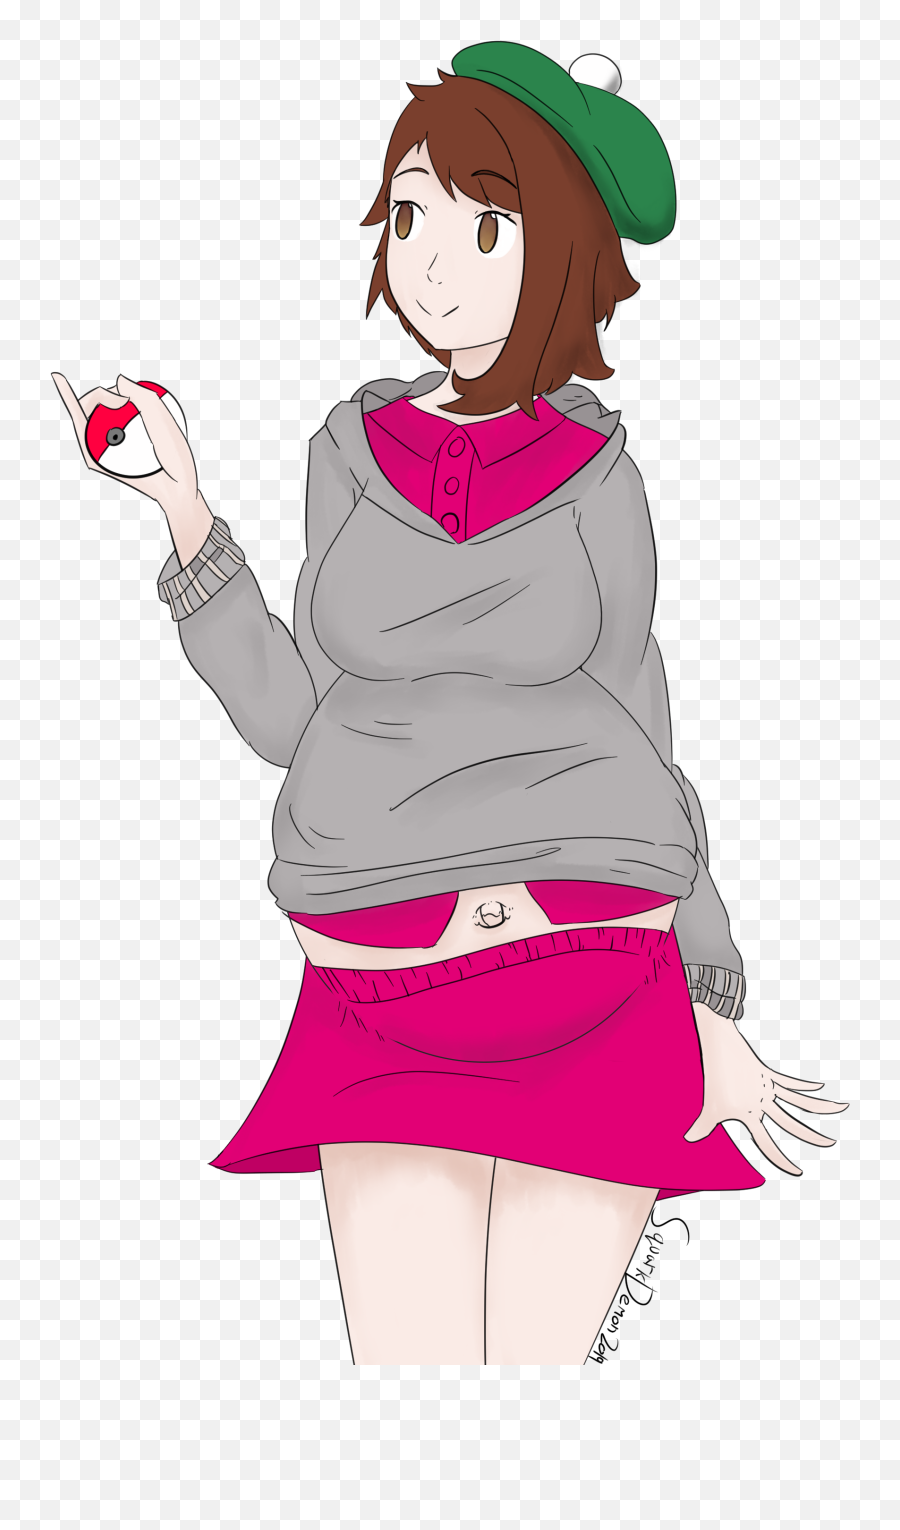 How Old Is The Trainer In Pokemon Sword And Shield Emoji,Pokemon Trainer Transparent